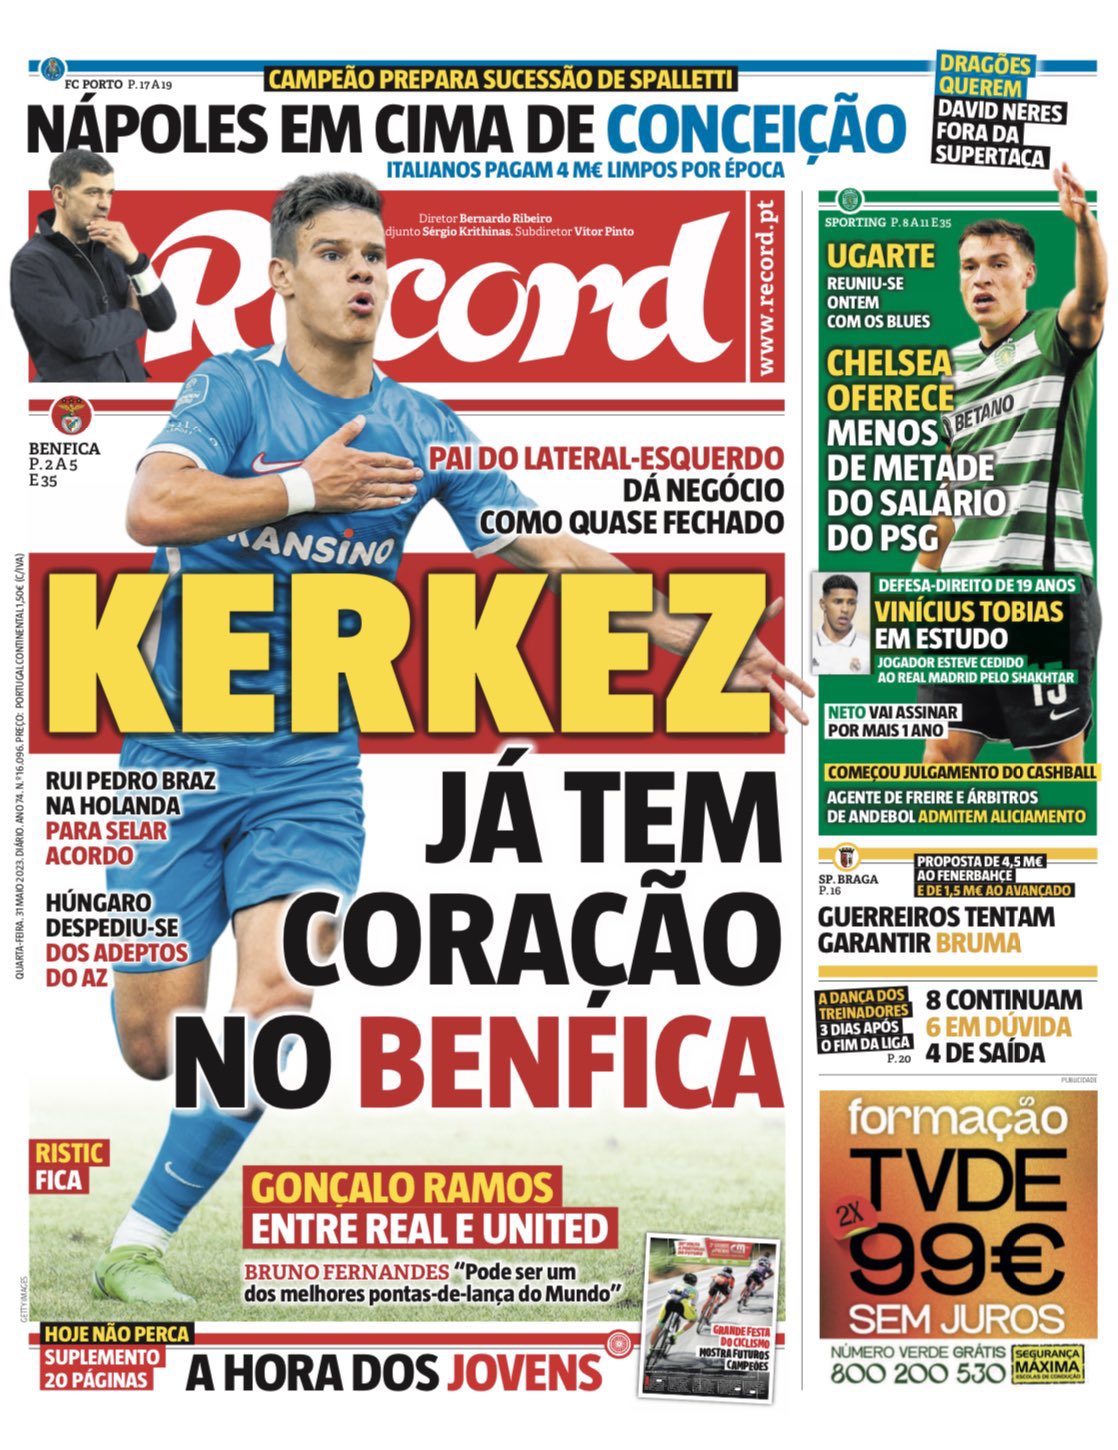 Hungarian Football Xtra on X: "📰🇵🇹| 🗞️ Record: Rui Pedro Braz has  travelled to the Netherlands to seal Benfica's signing of Milos Kerkez. 🗞️  A Bola: Benfica are looking to sign Milos